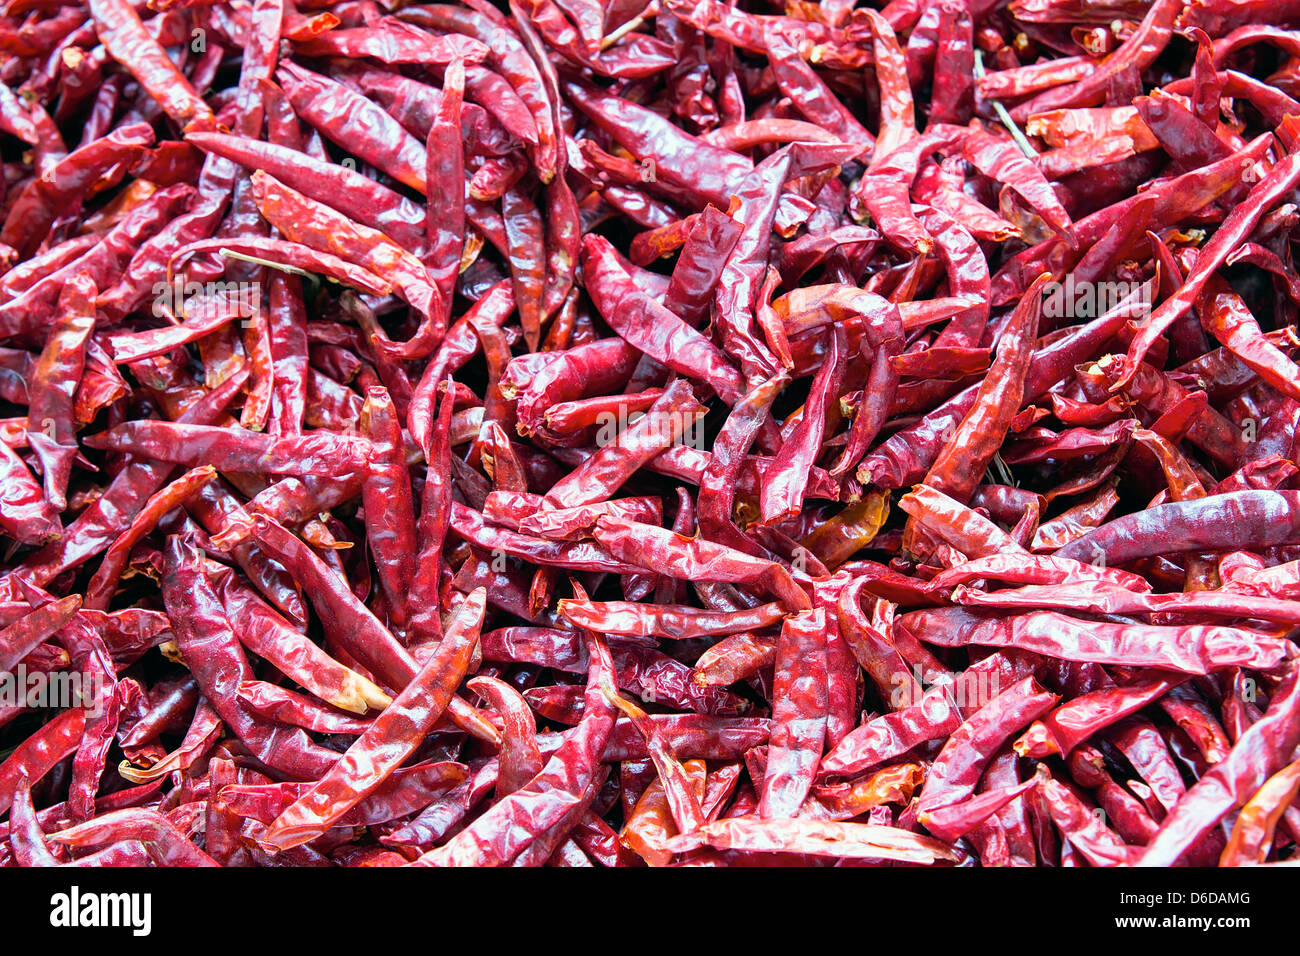 Dried Red Chili Peppers in Southeast Asia Wet Market Background Stock Photo